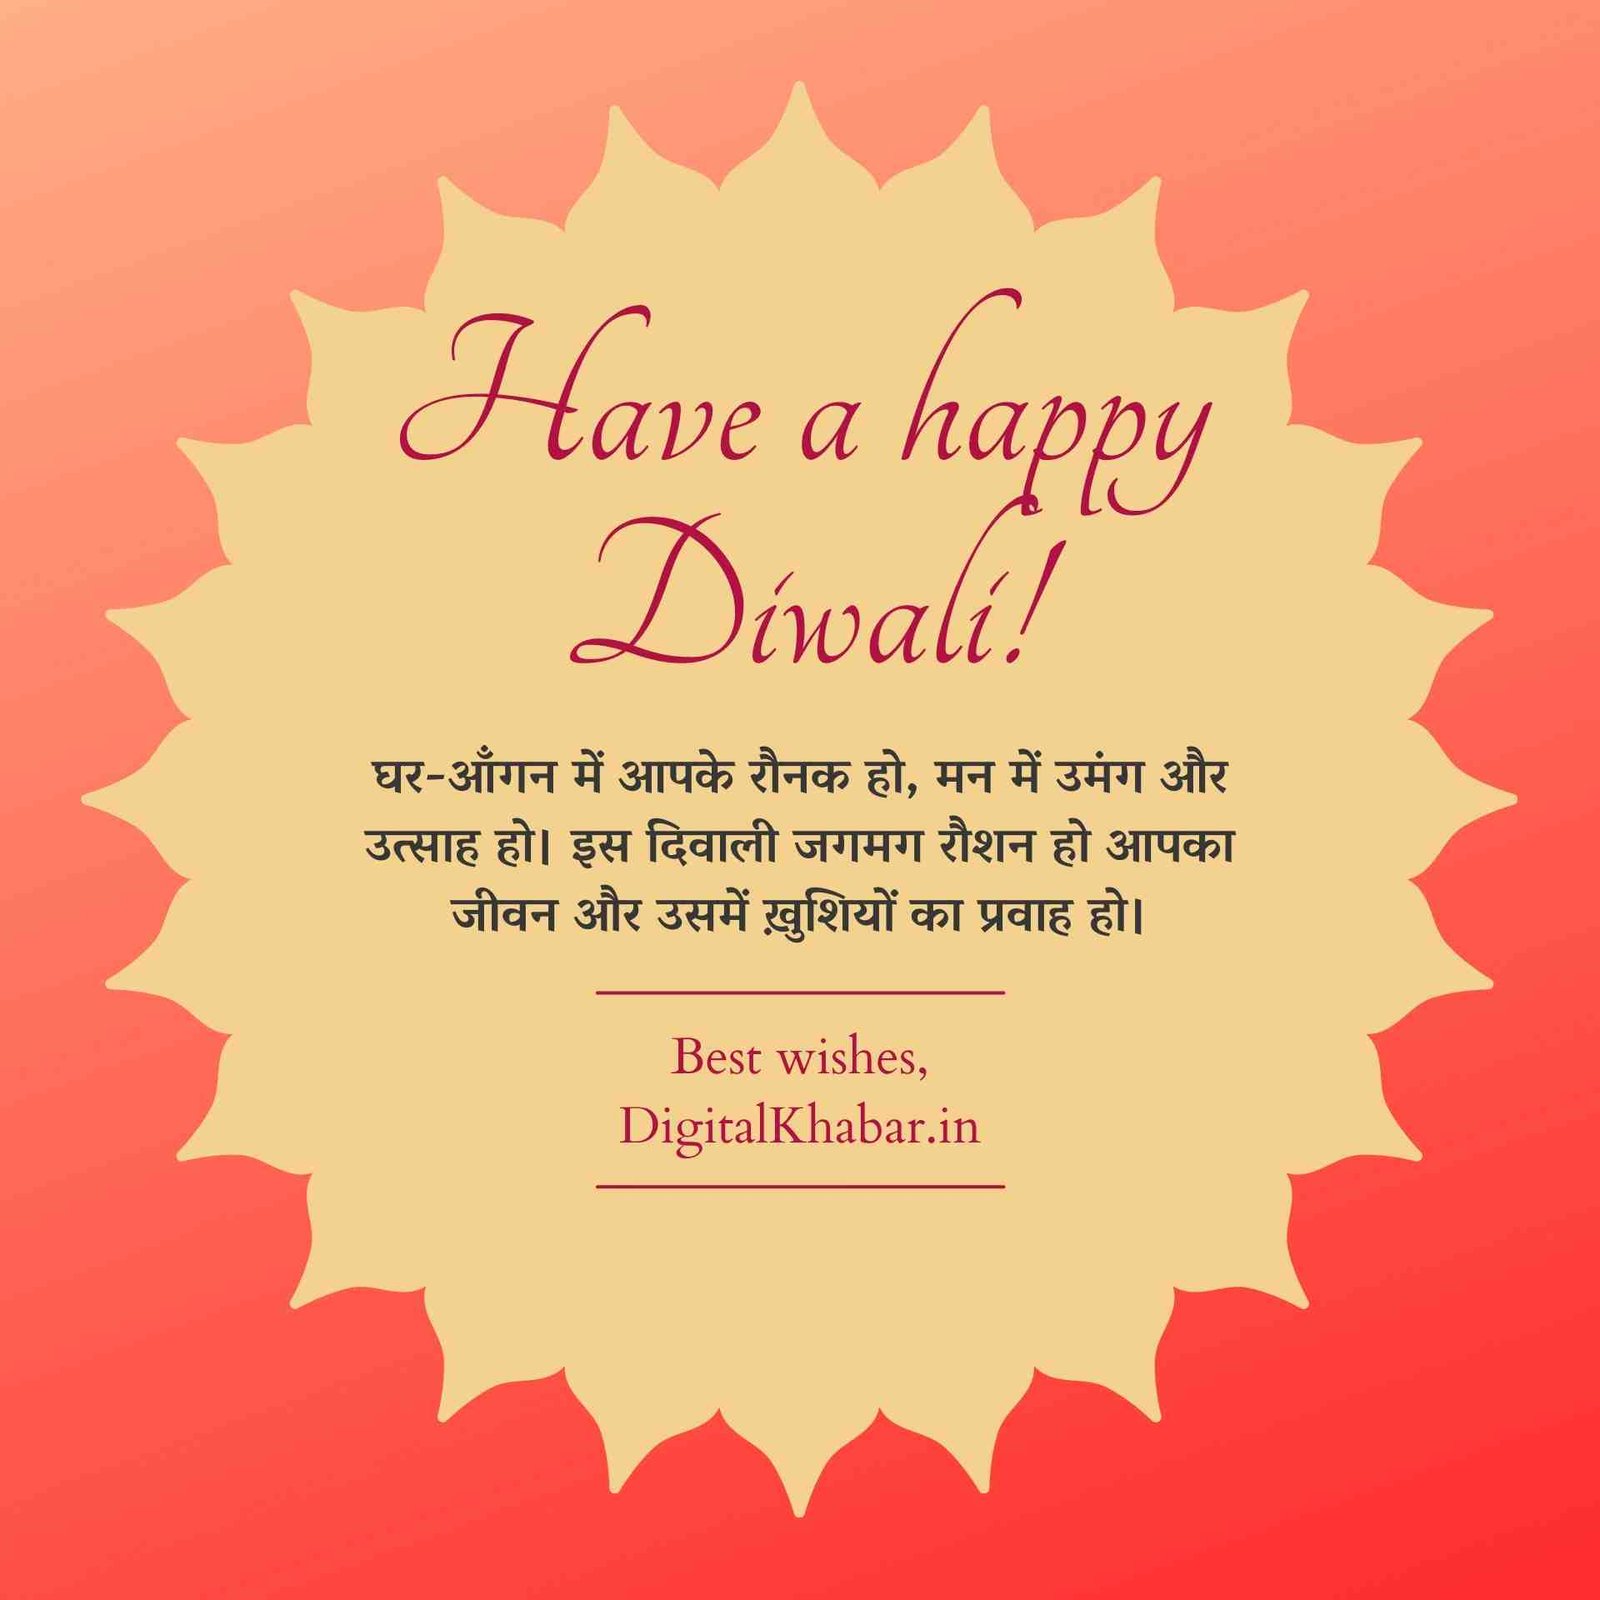 have a happy diwali wishes in hindi